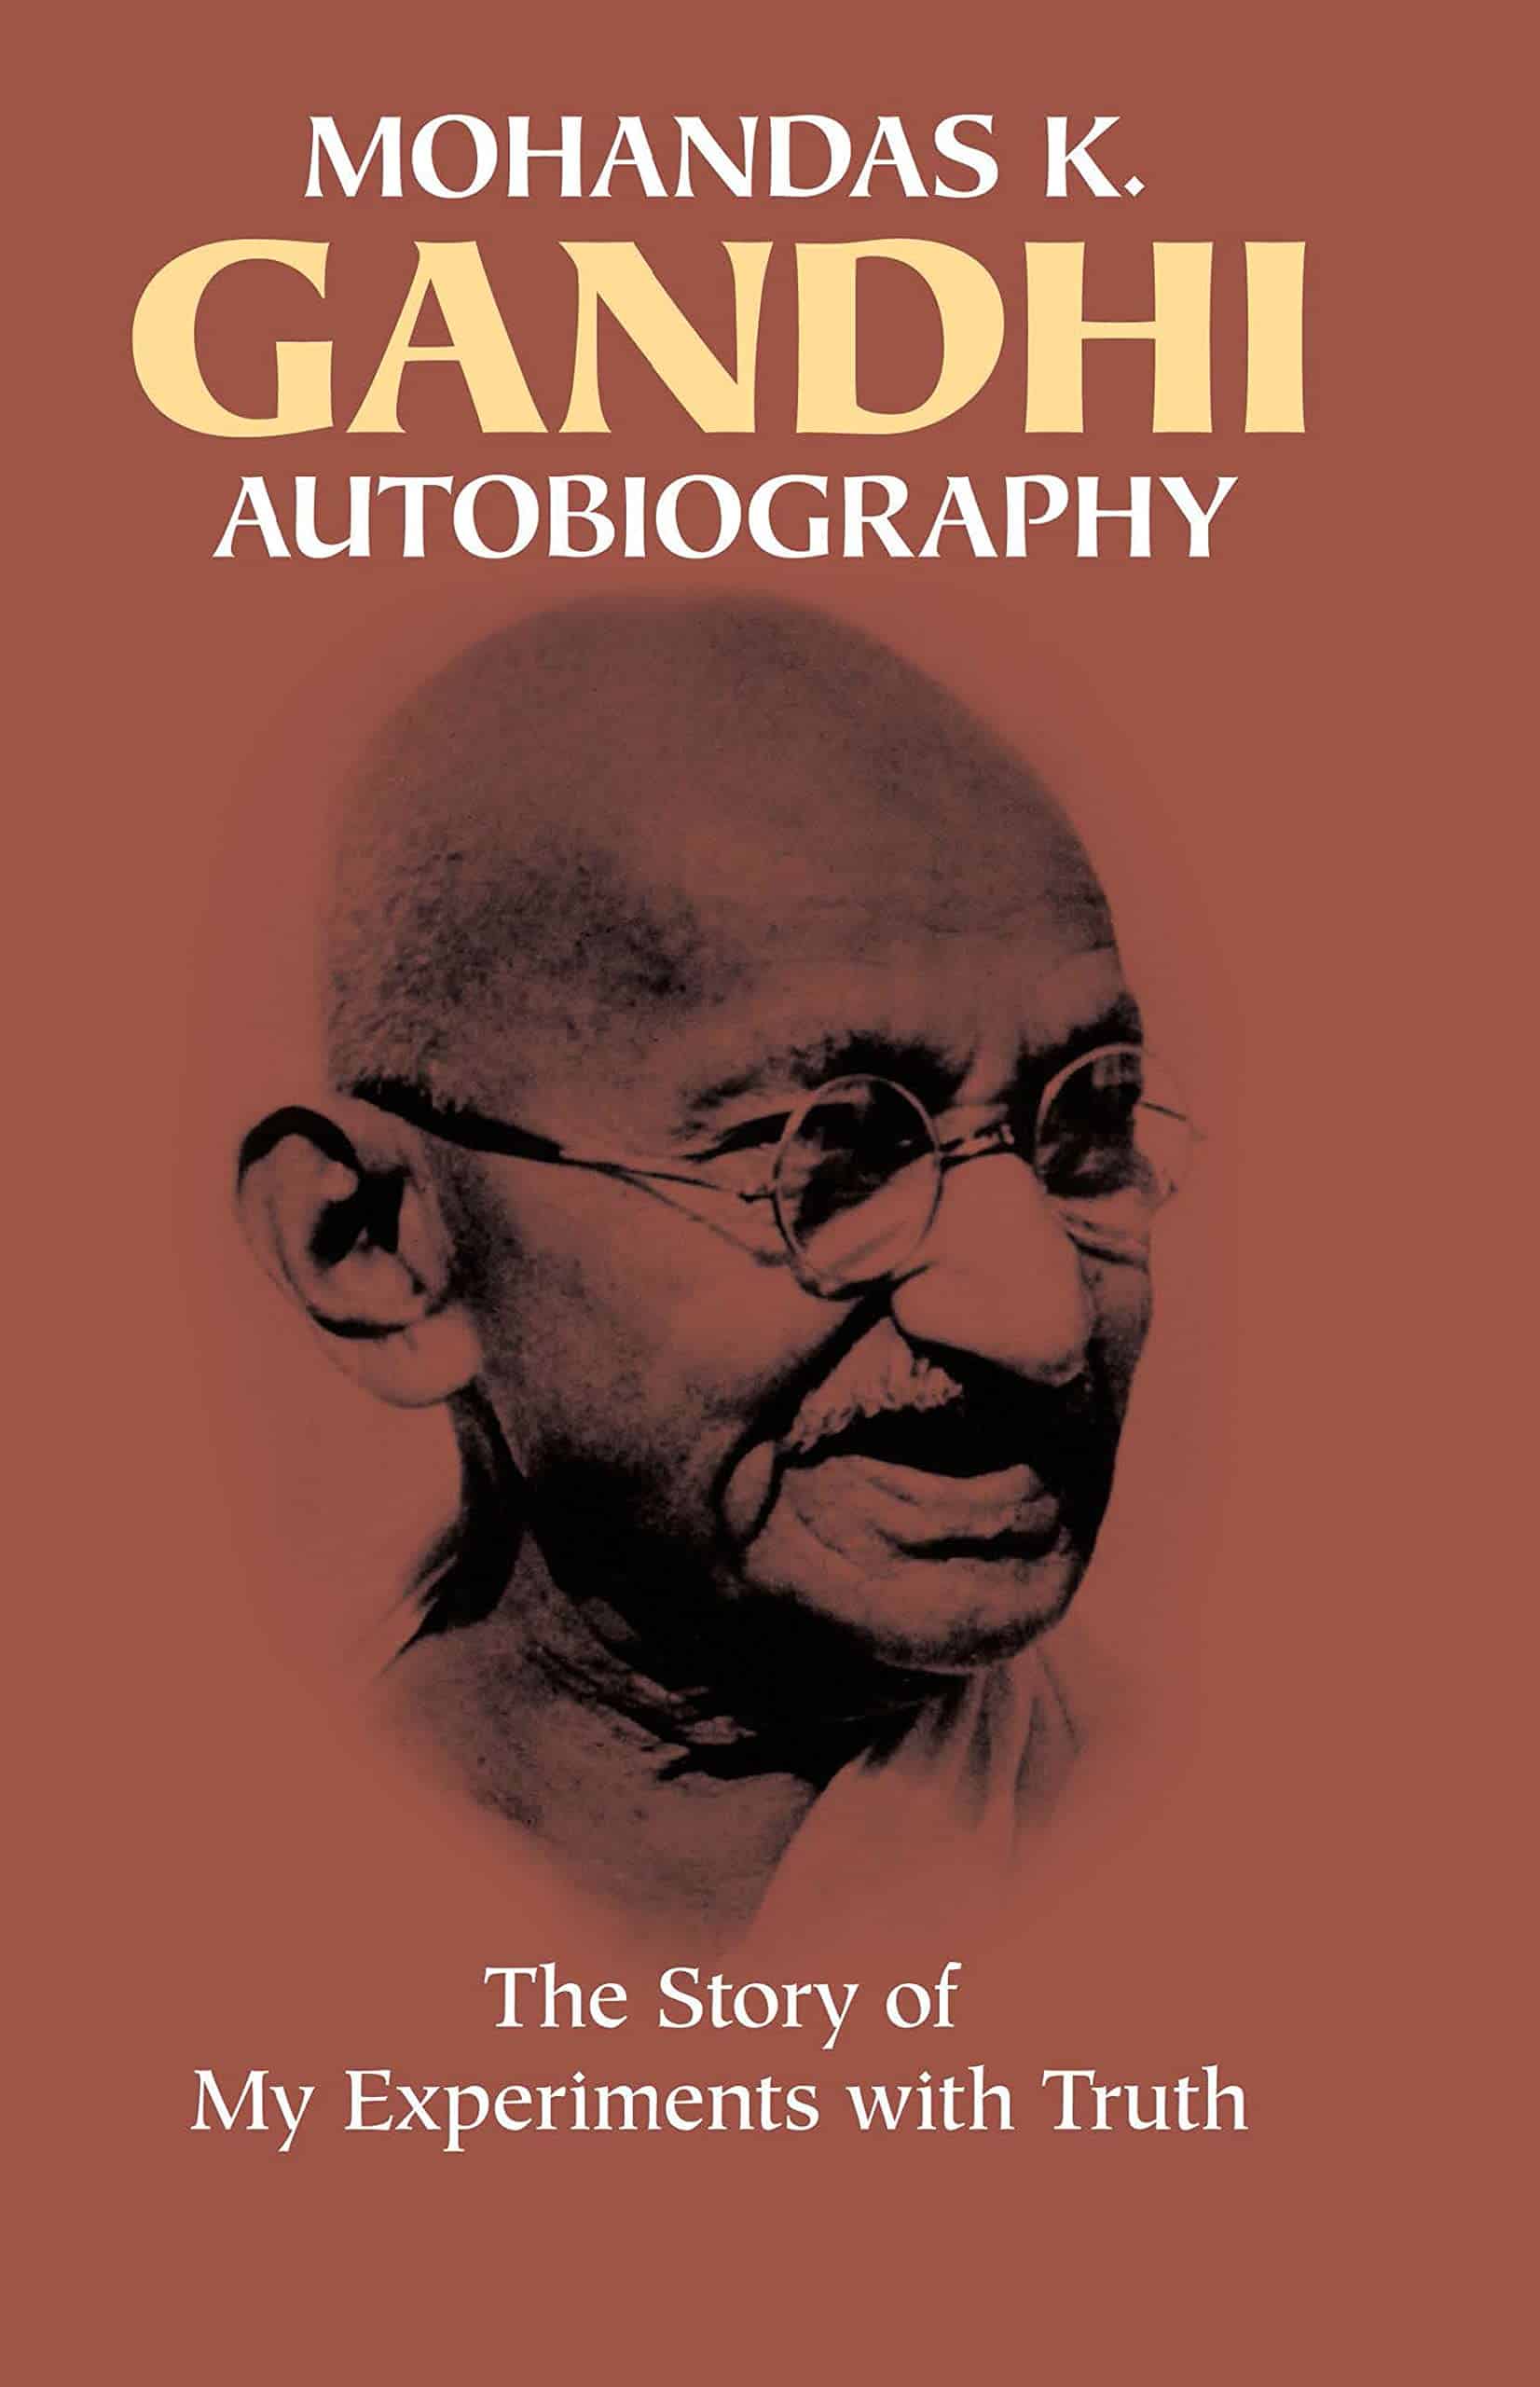 The Story of My Experiments with Truth by Mahatma Gandhi book cover